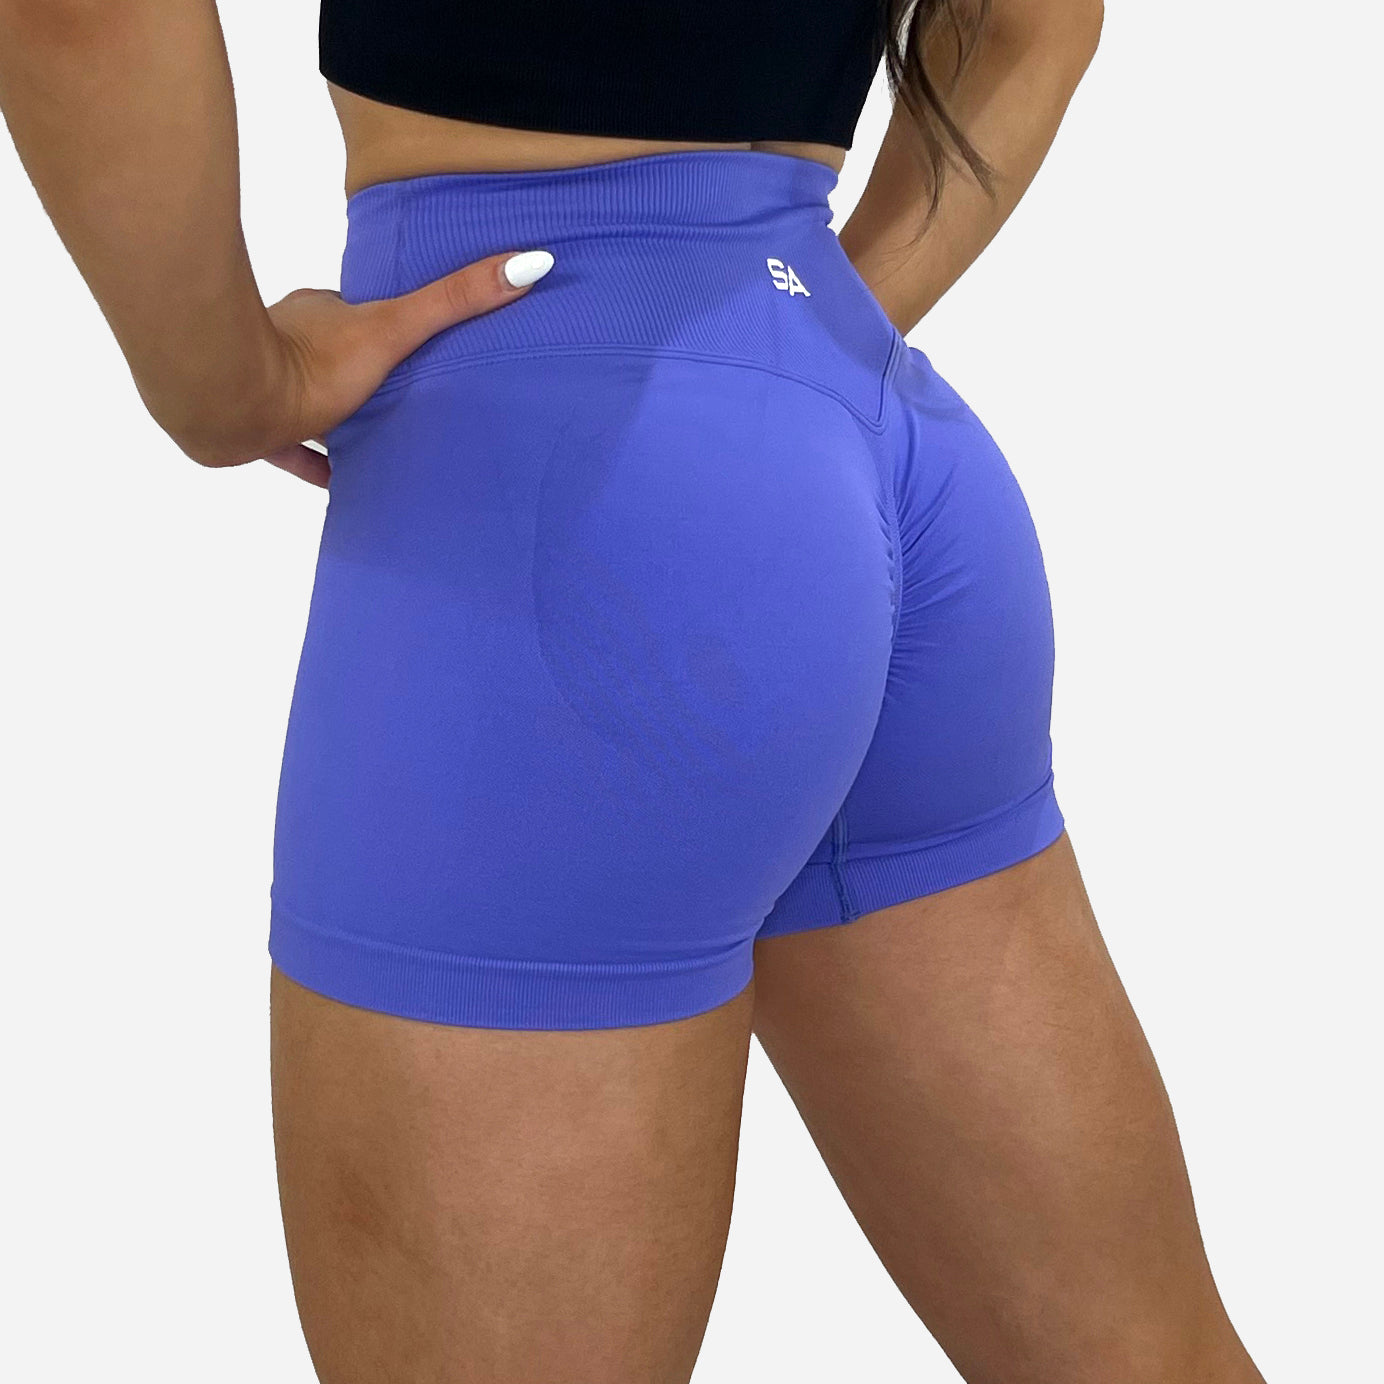 Breathable High Waisted Athletic Workout Shorts Women For Women Hotty,  Loose Fit, With Liner And Zip Pocket Ideal For Running, Gym, Yoga And  Summer Workouts From Luluyogazone, $17.09